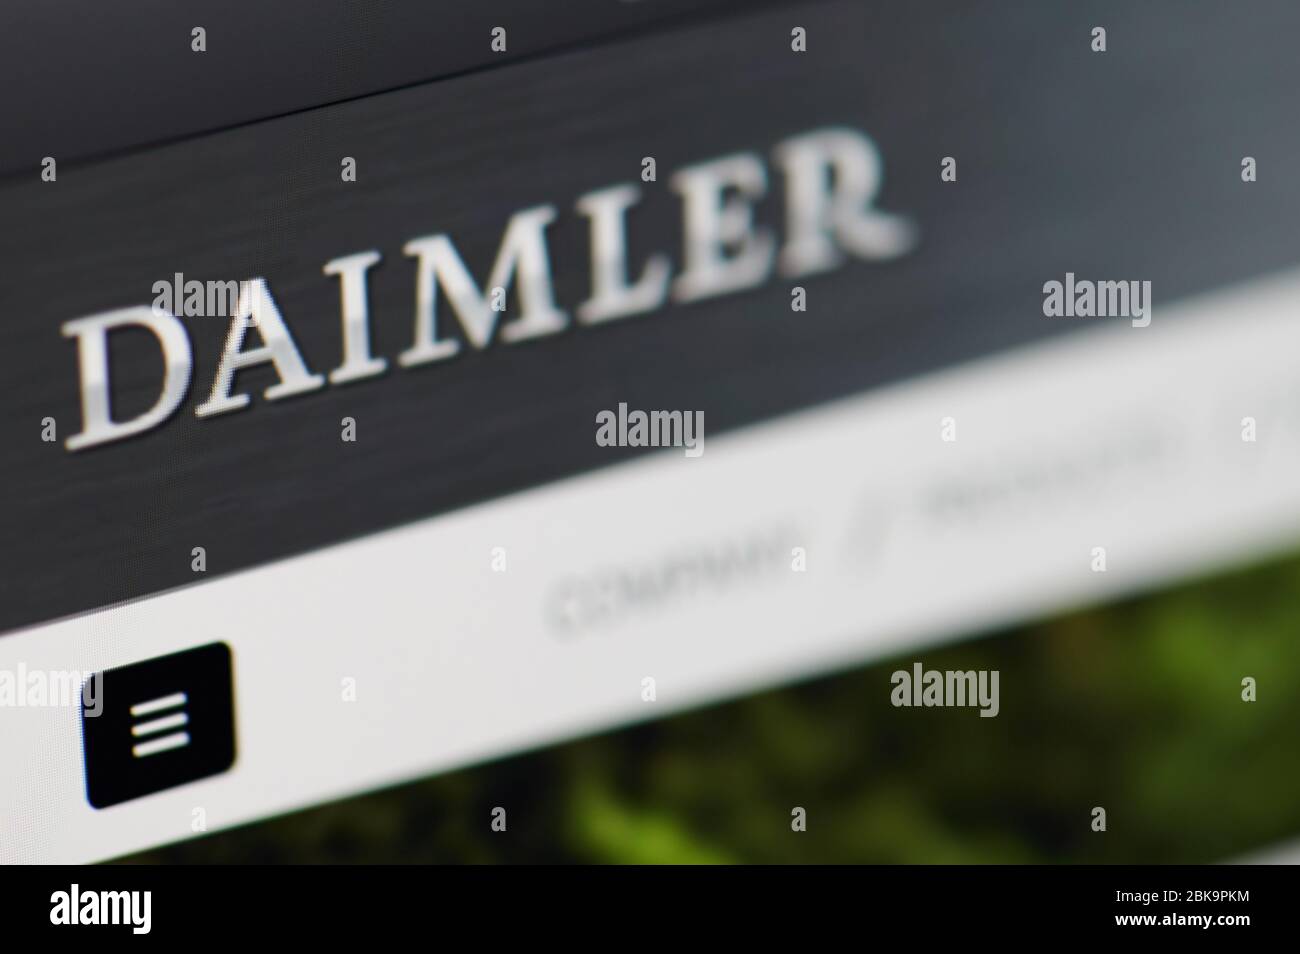 New-York , USA - April 29 , 2020: Daimler home web page close up view on laptop screen Stock Photo